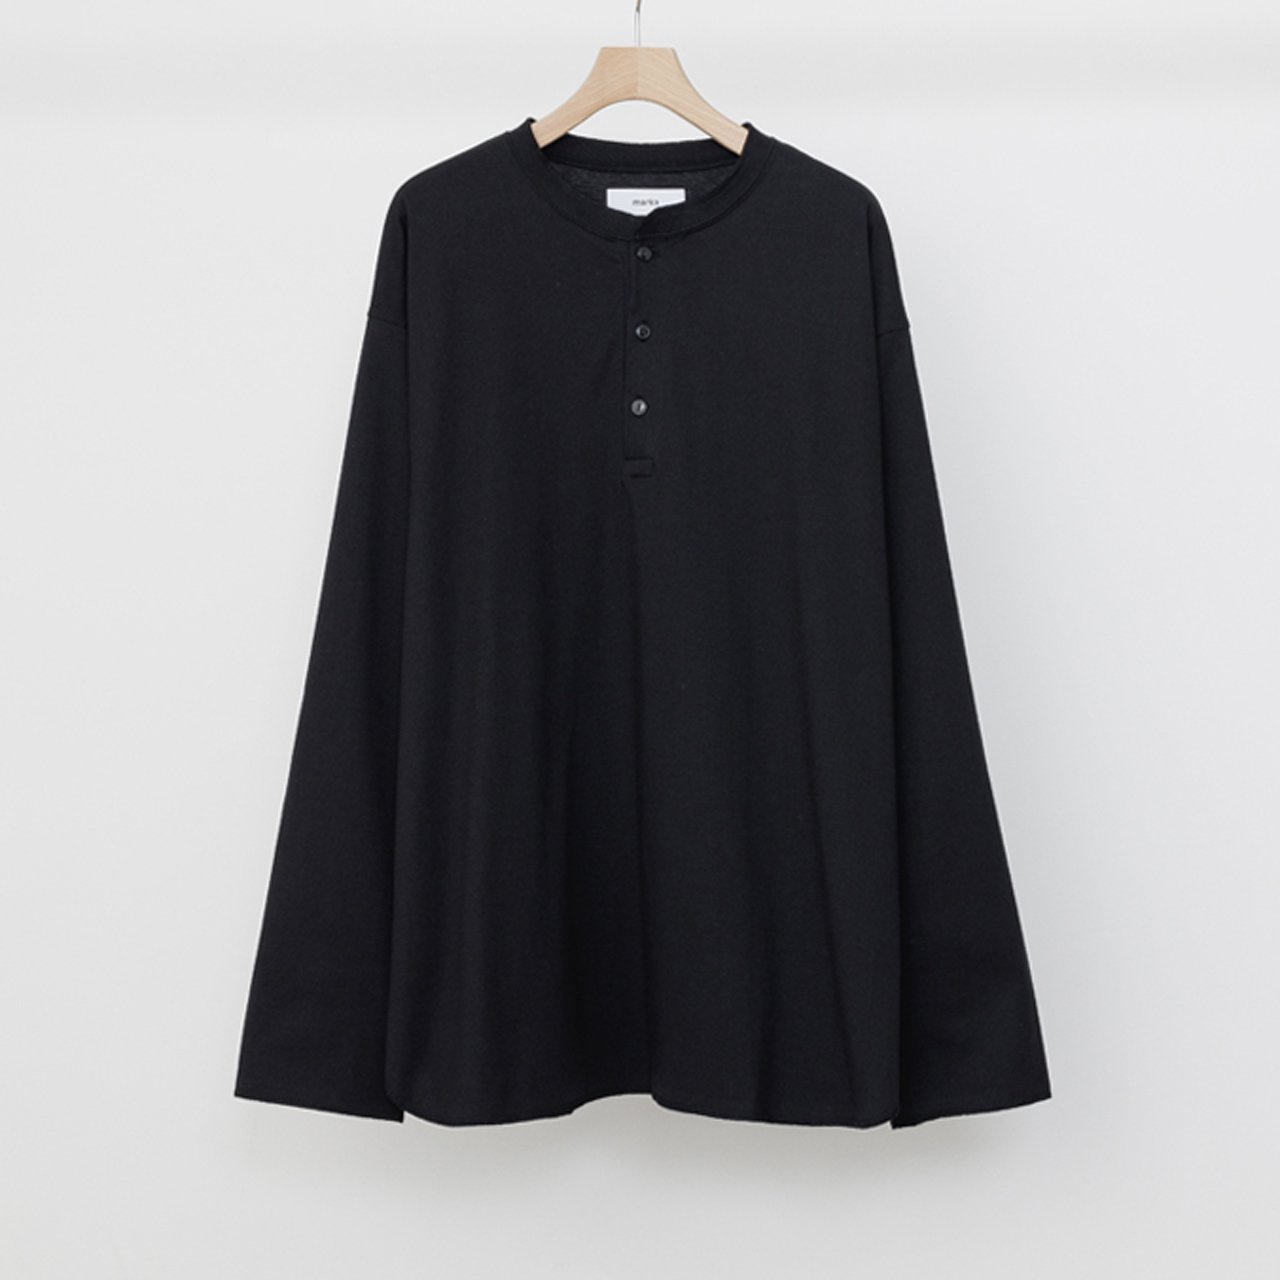 <img class='new_mark_img1' src='https://img.shop-pro.jp/img/new/icons5.gif' style='border:none;display:inline;margin:0px;padding:0px;width:auto;' />marka (マーカ)｜HENLEY NECK TEE BLACK -40/2 ORGANIC COTTON KNIT-